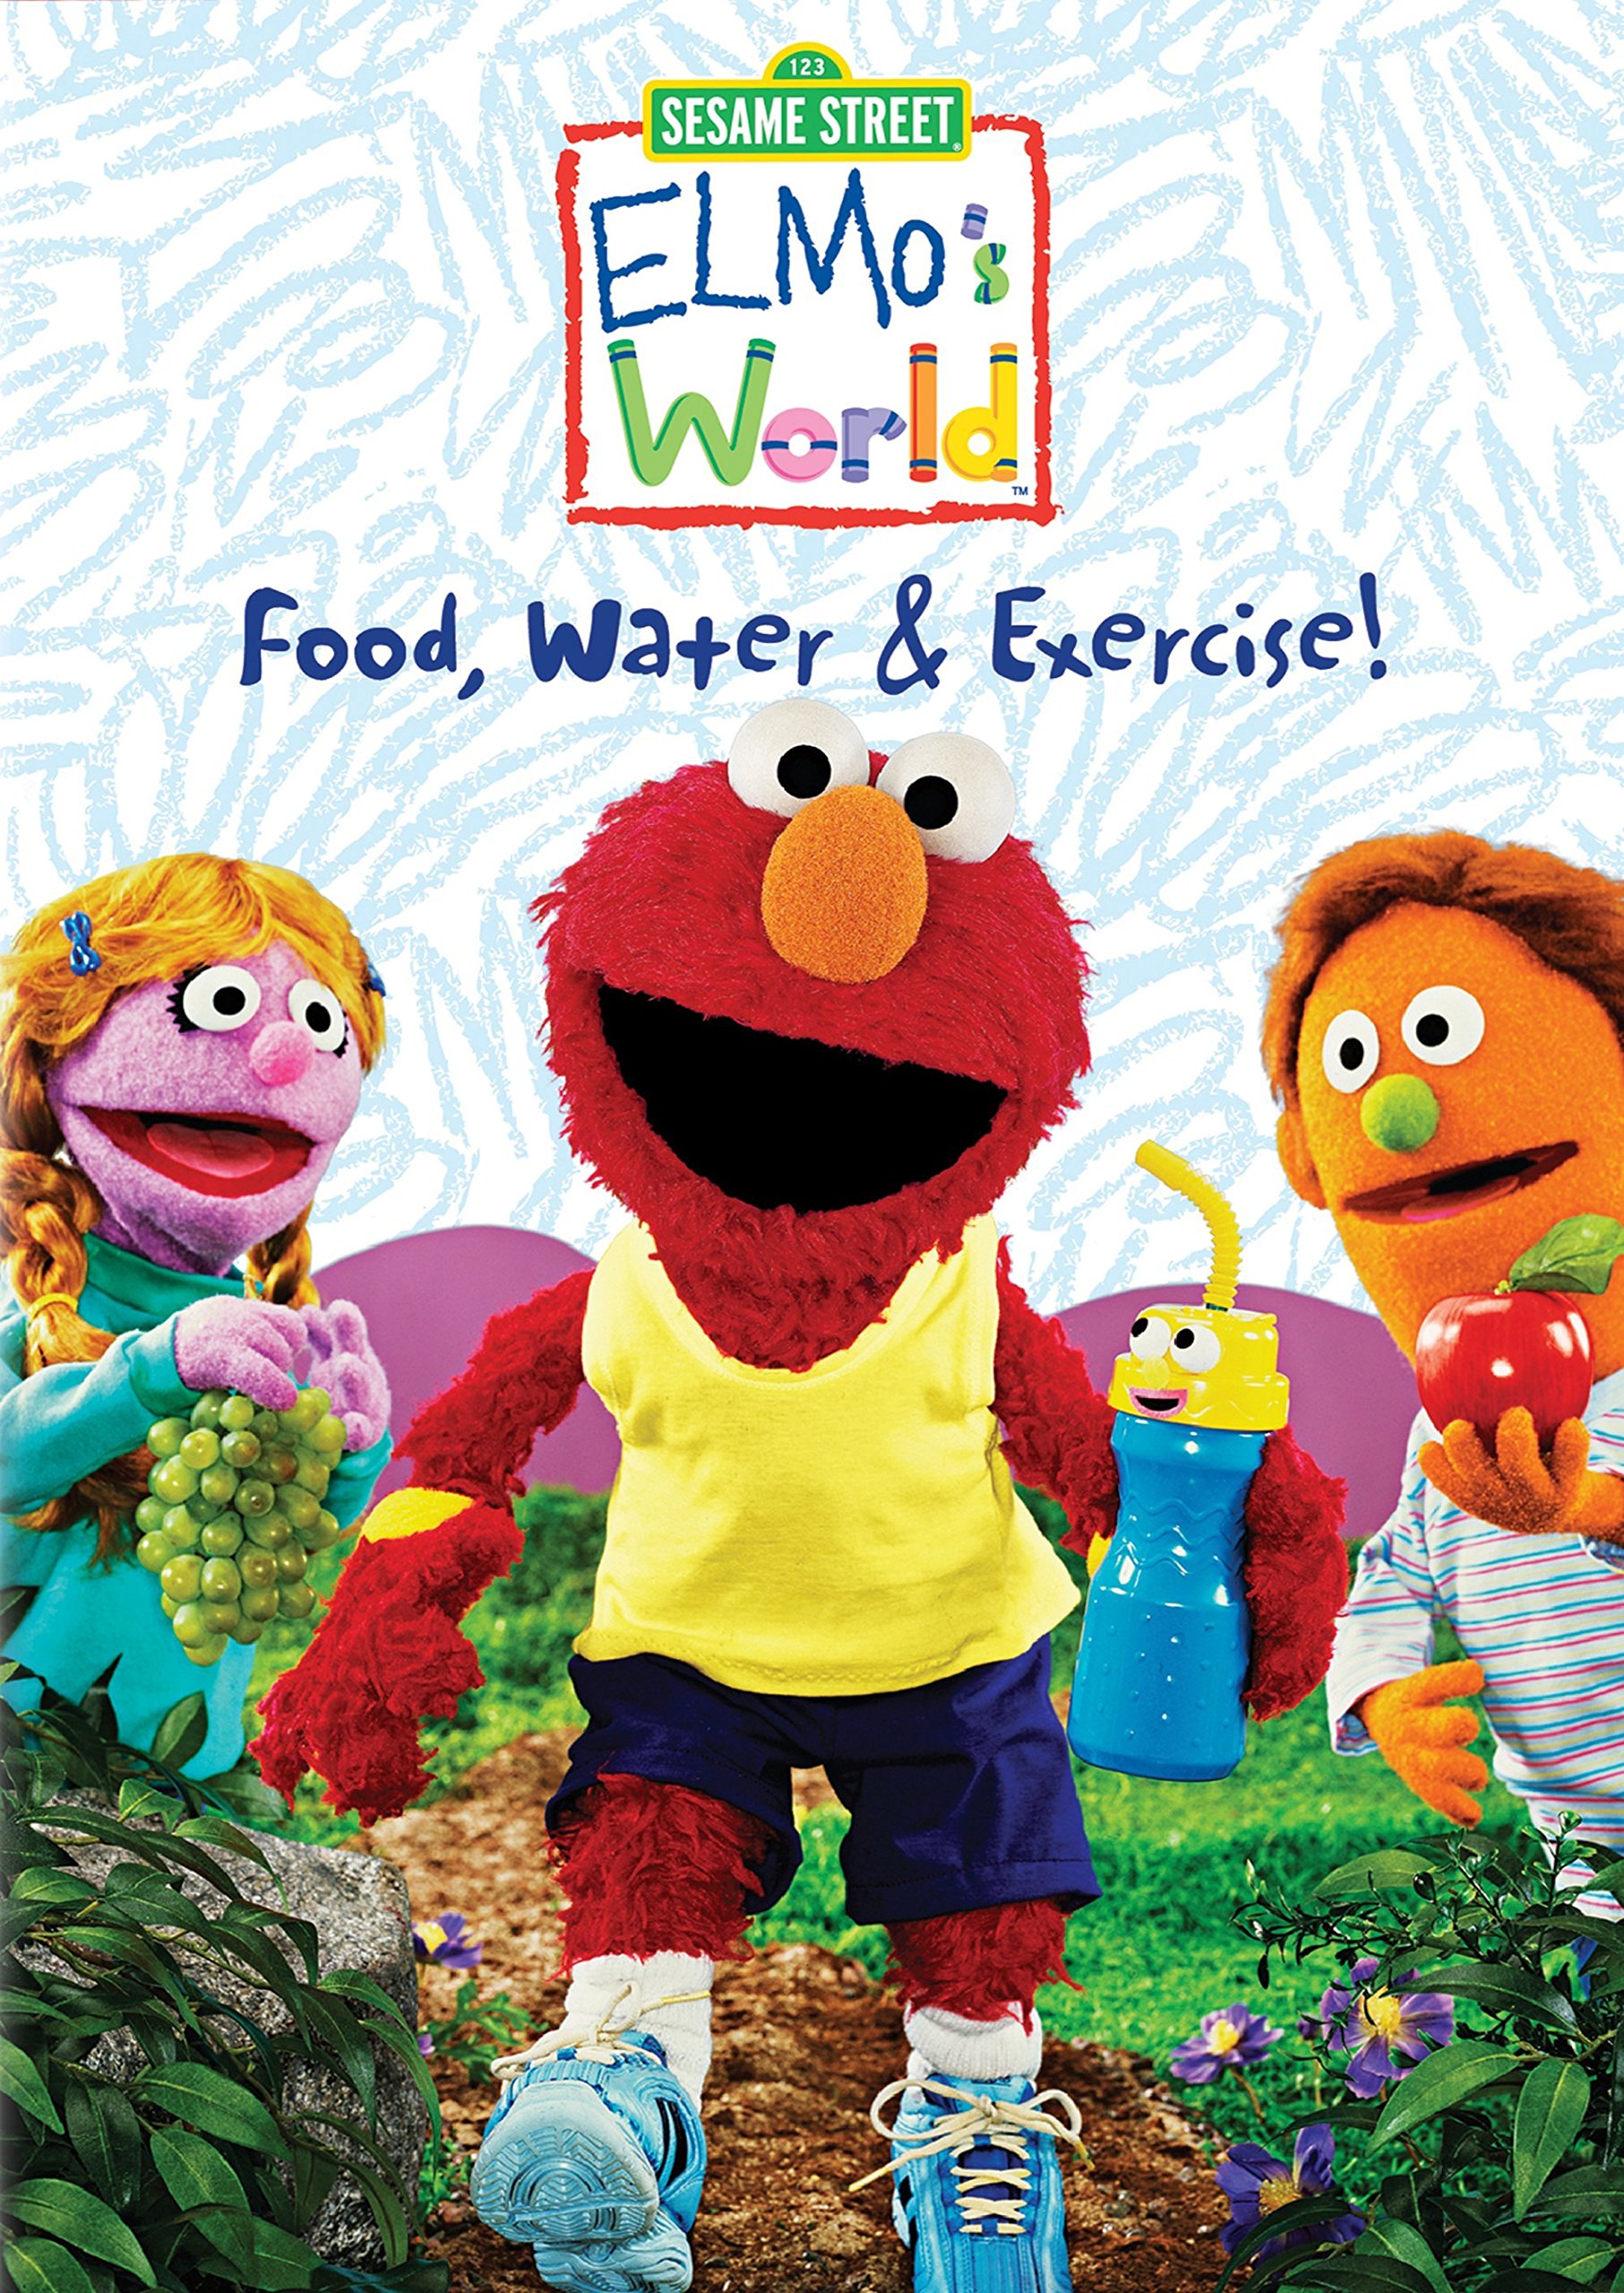 Elmo's World: Food, Water & Exercise!